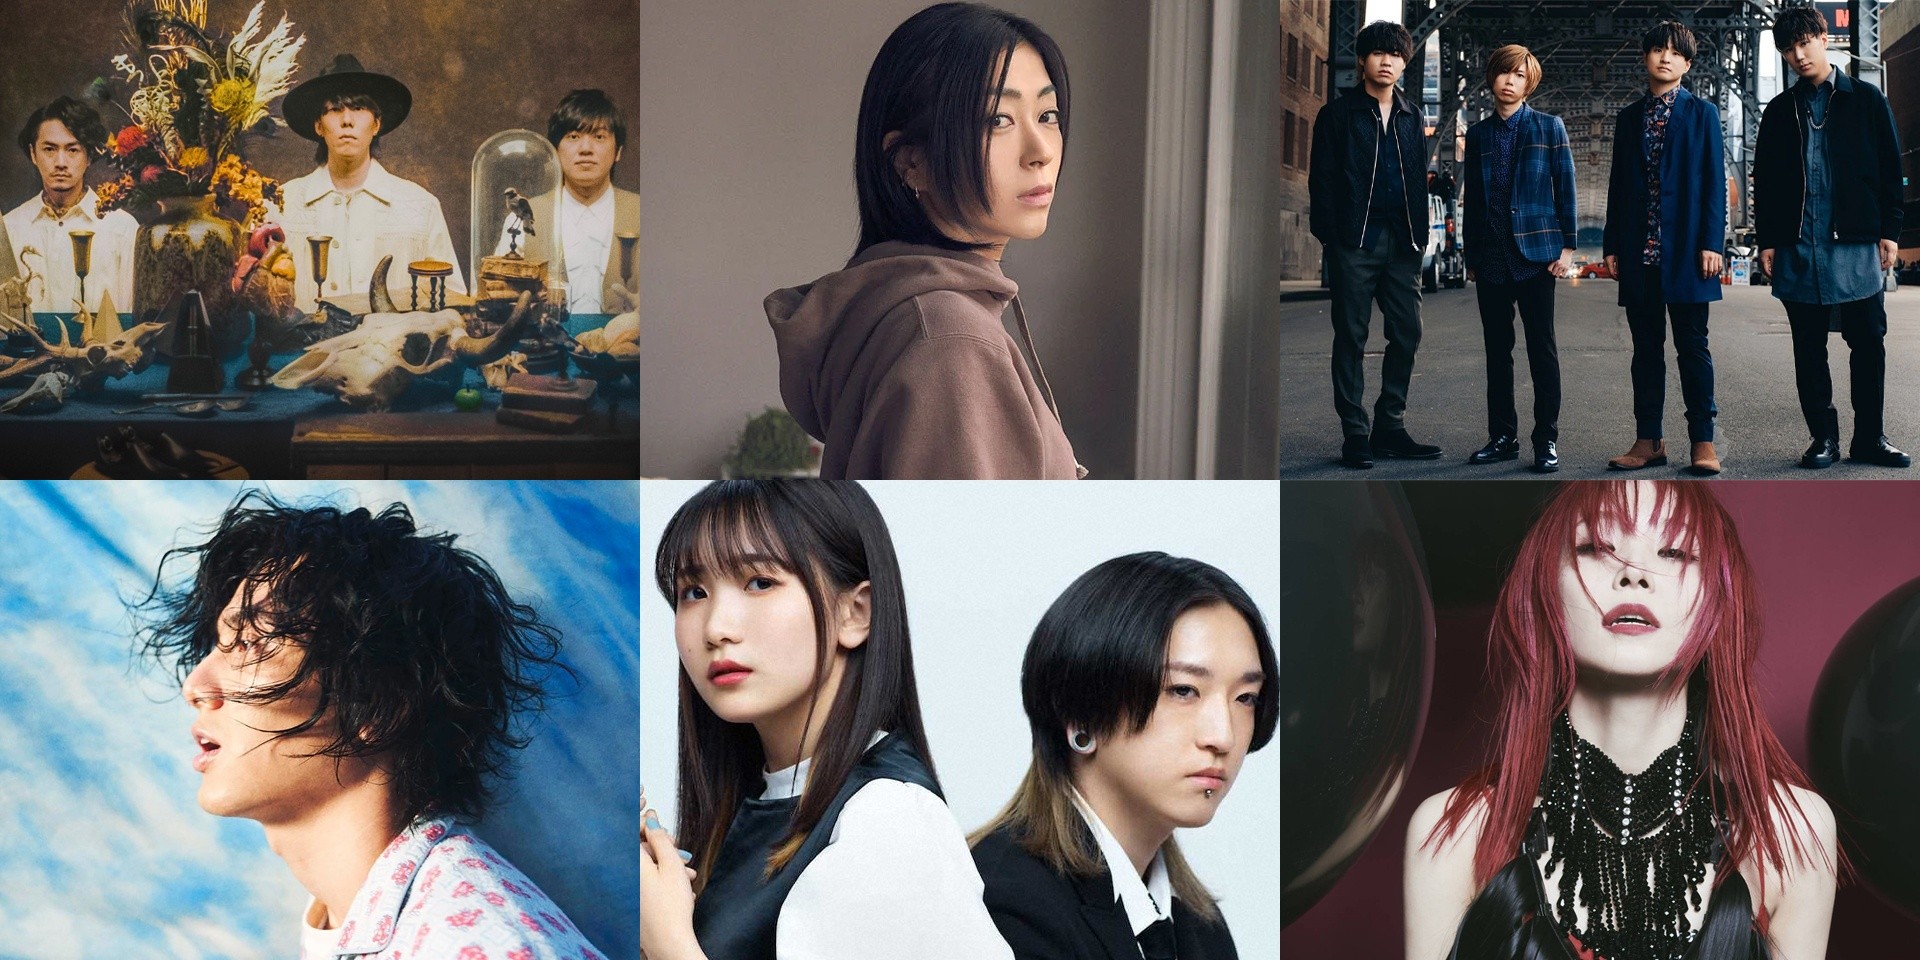 Here are the nominees for the Space Shower Music Awards 2022 – Hikaru Utada, RADWIMPS, LiSA, Yoasobi, and more